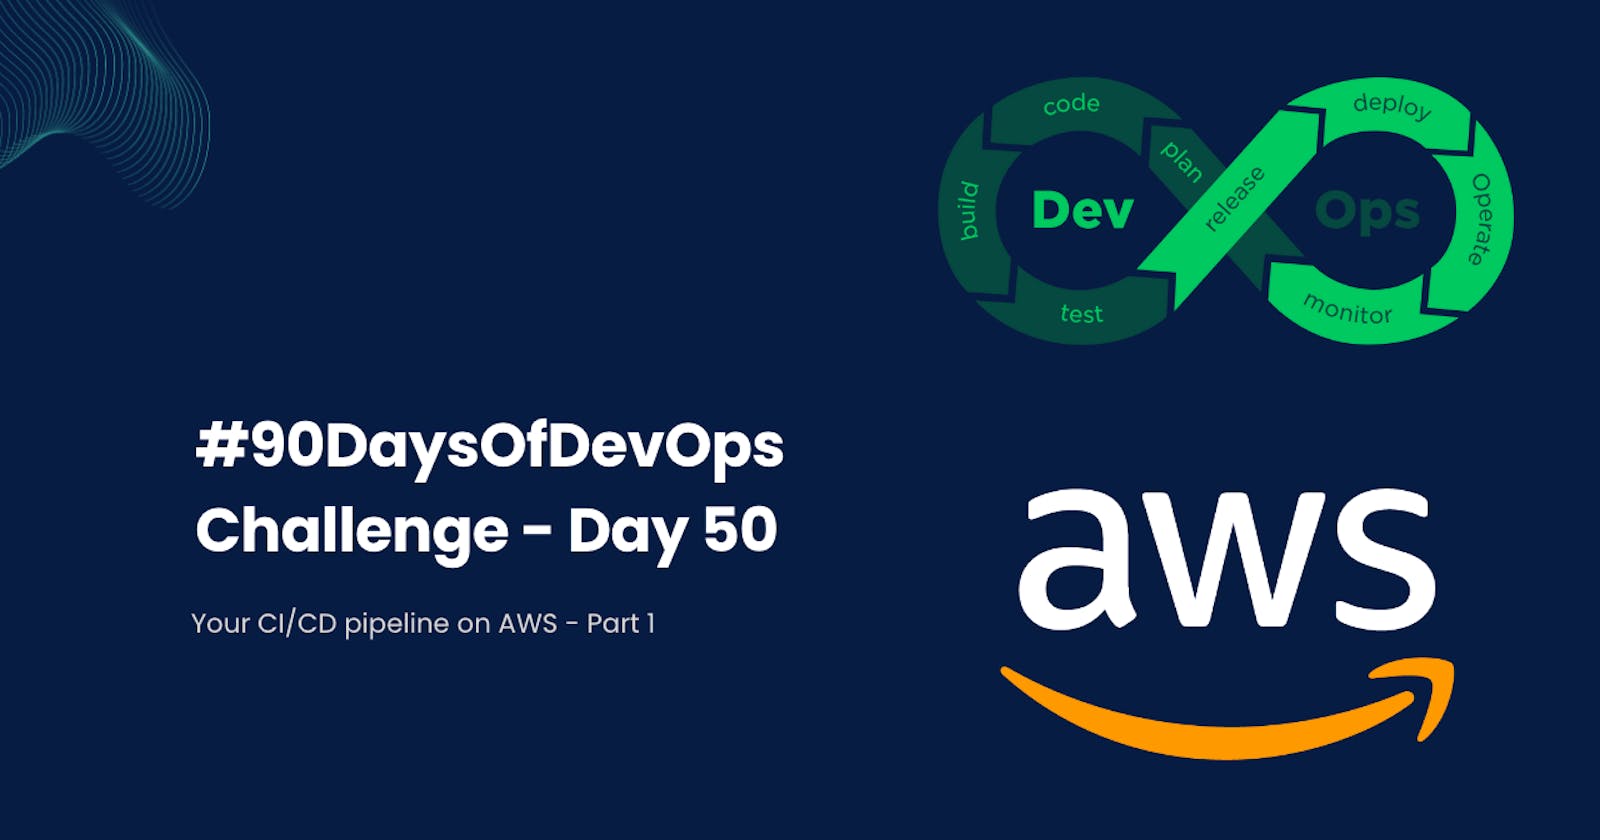 #90DaysOfDevOps Challenge - Day 50 - Your CI/CD pipeline on AWS - Part 1 🚀 ☁